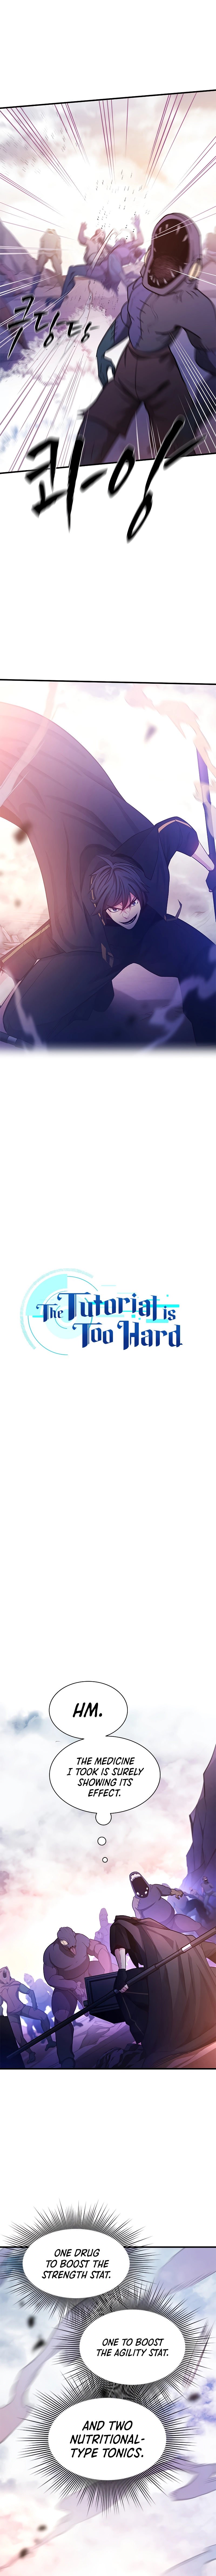 the-tutorial-is-too-hard-chap-155-2